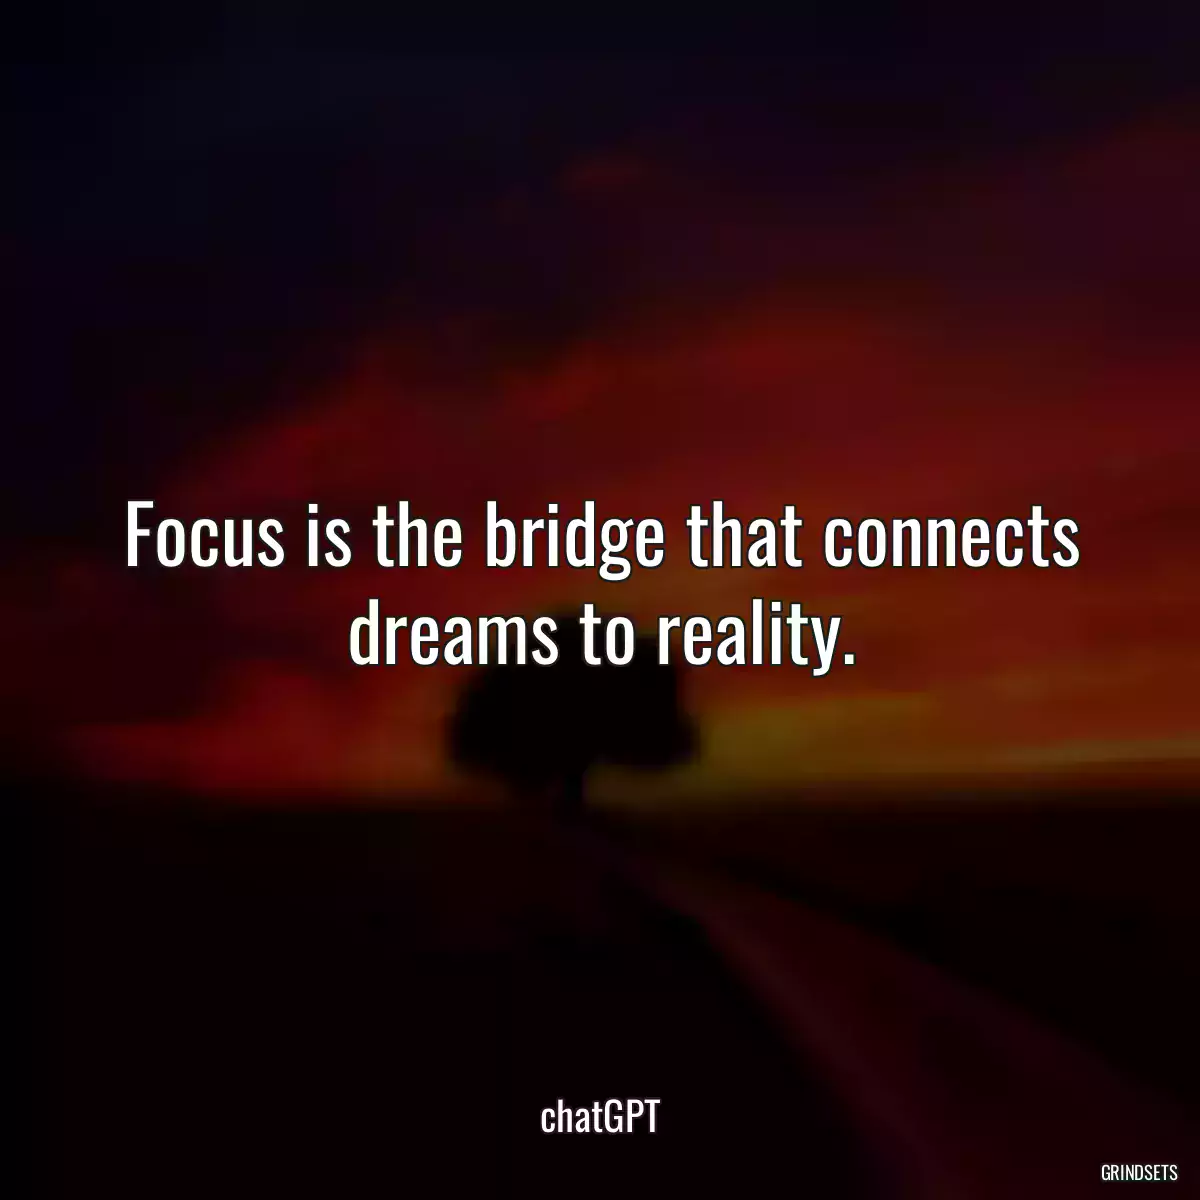 Focus is the bridge that connects dreams to reality.